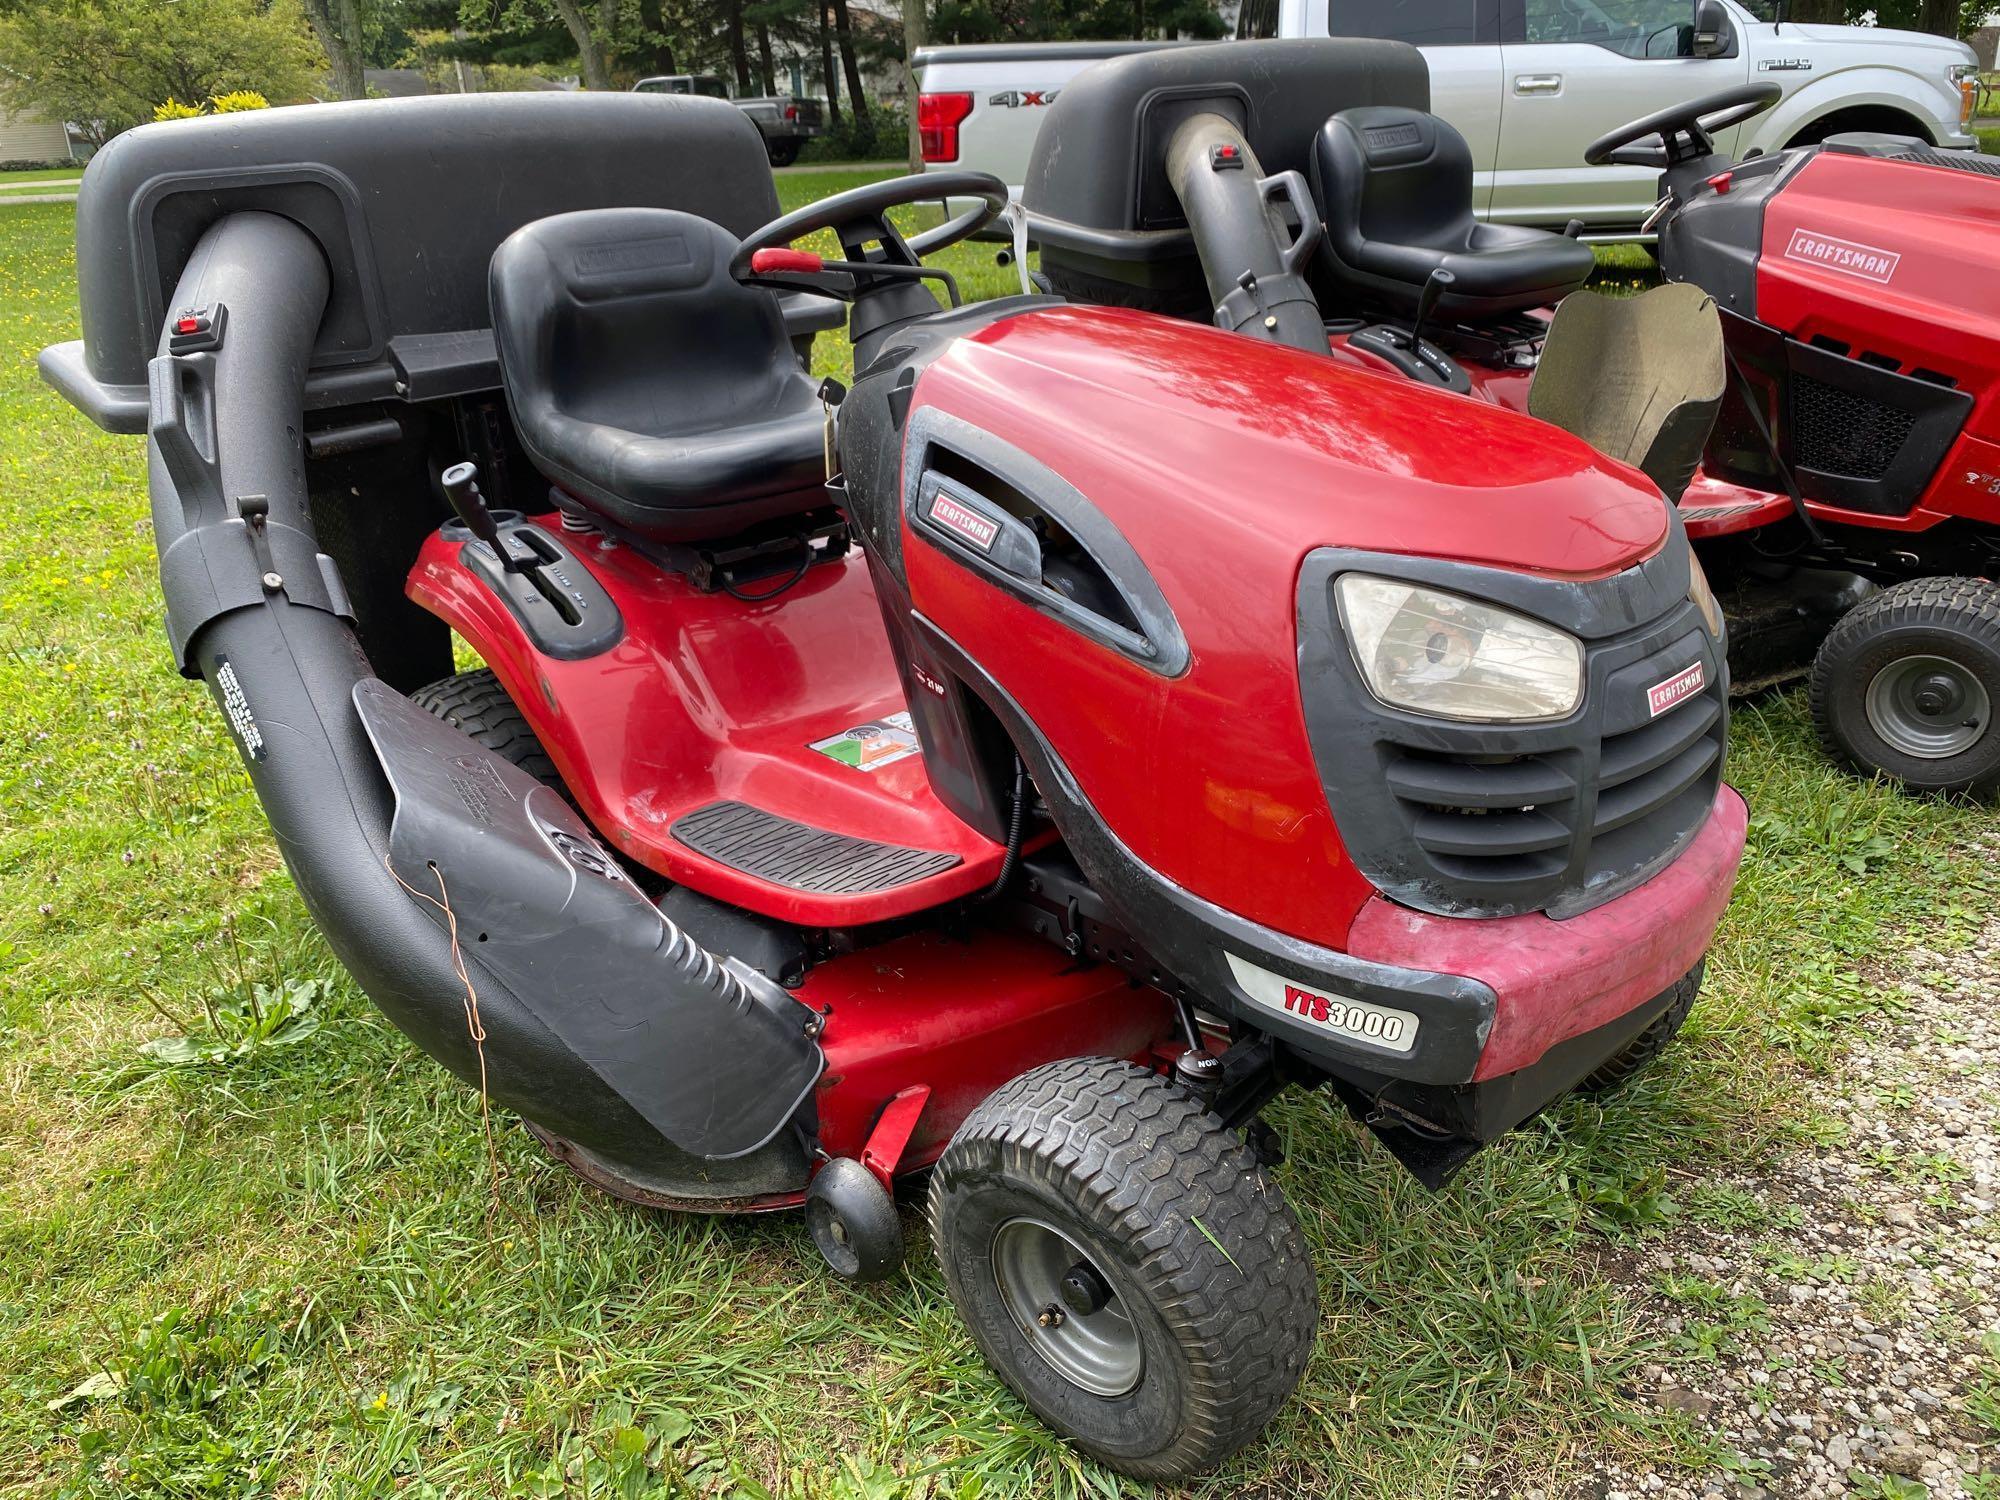 Craftsman YTS3000 Riding mower with bagger